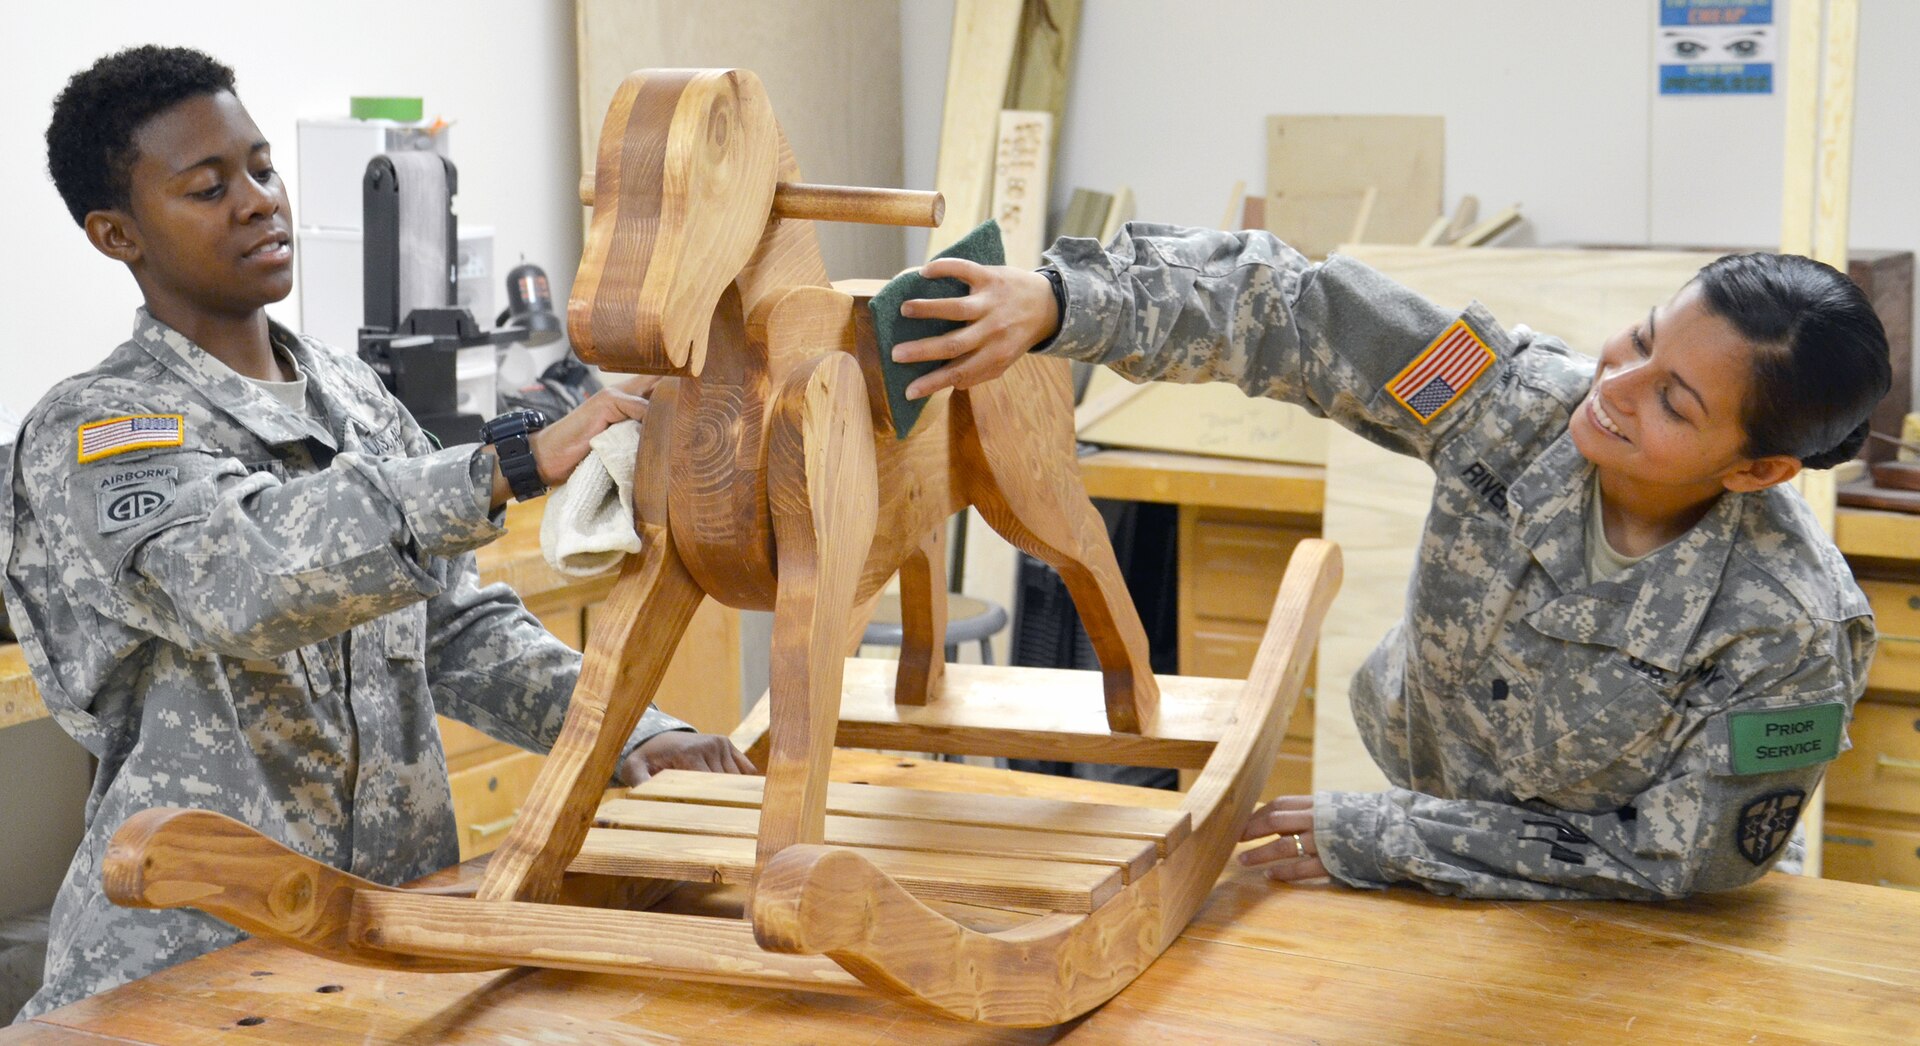 Spc. Ryan Jamerson (left) and Spc. Jacqueline Rivera, students in the occupational therapy assistant program at the Medical Education and Training Campus at Joint Base San Antonio-Fort Sam Houston, sand and clean a wood rocking horse that will be presented to a pediatric therapy clinic. The program’s clinical coordinator, Jeffrey Bruce, built the horse and brought it to the occupational therapy assistant program’s workshop for students and staff to help finish. The occupational therapy assistant program workshop allows students to learn therapeutic techniques that will help patients increase tolerance to specific activities, improve motor control and increase strength and balance.
Photo by Lisa Braun